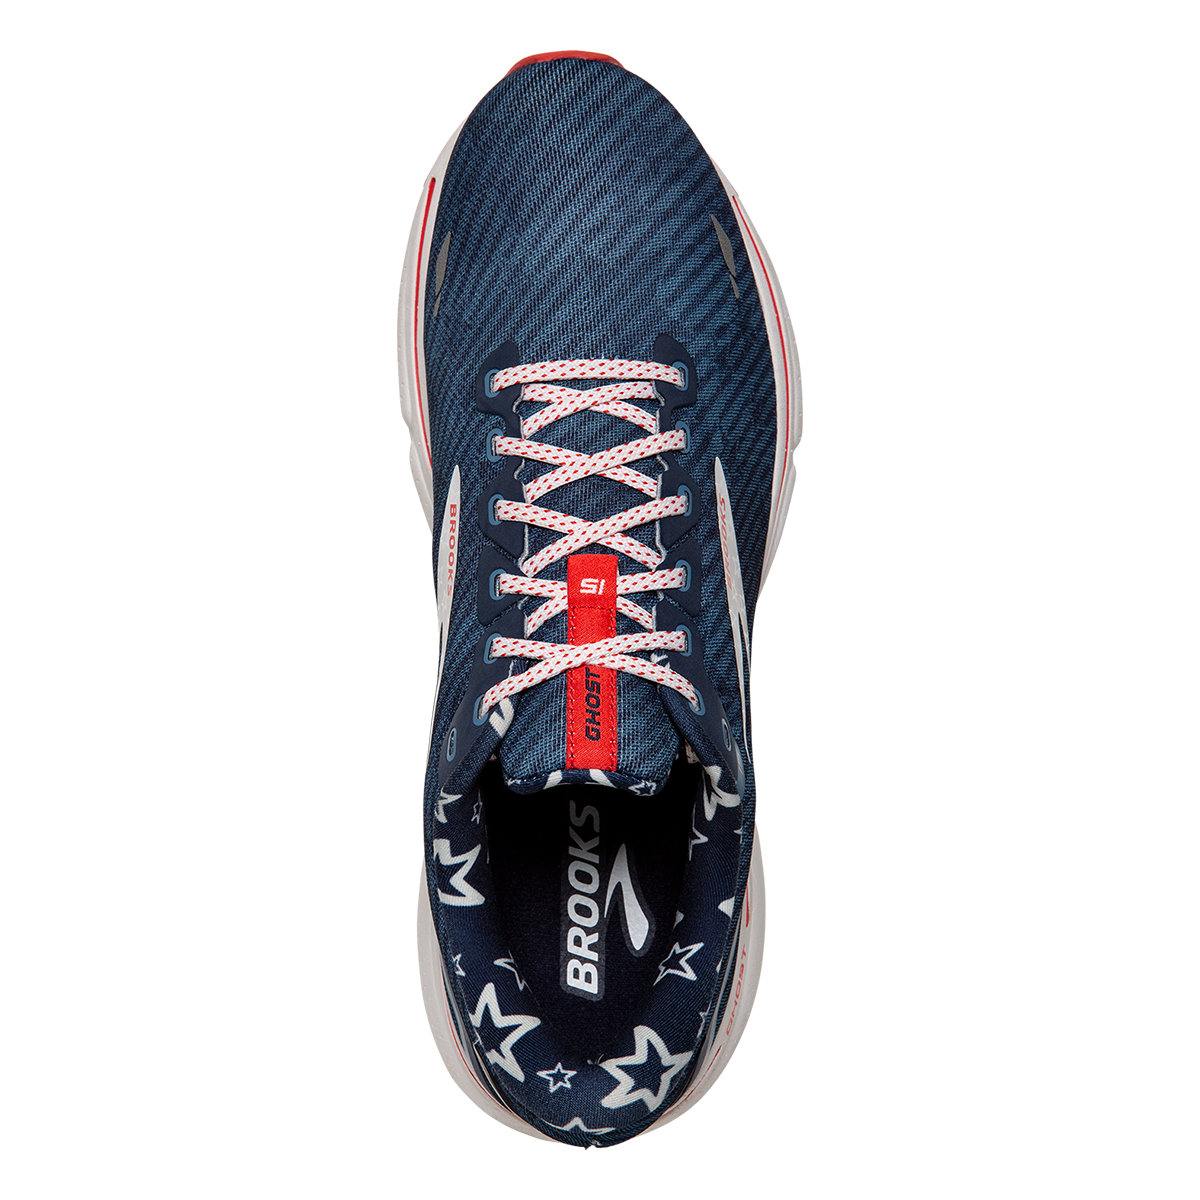 Brooks Ghost 15 Run USA, , large image number null